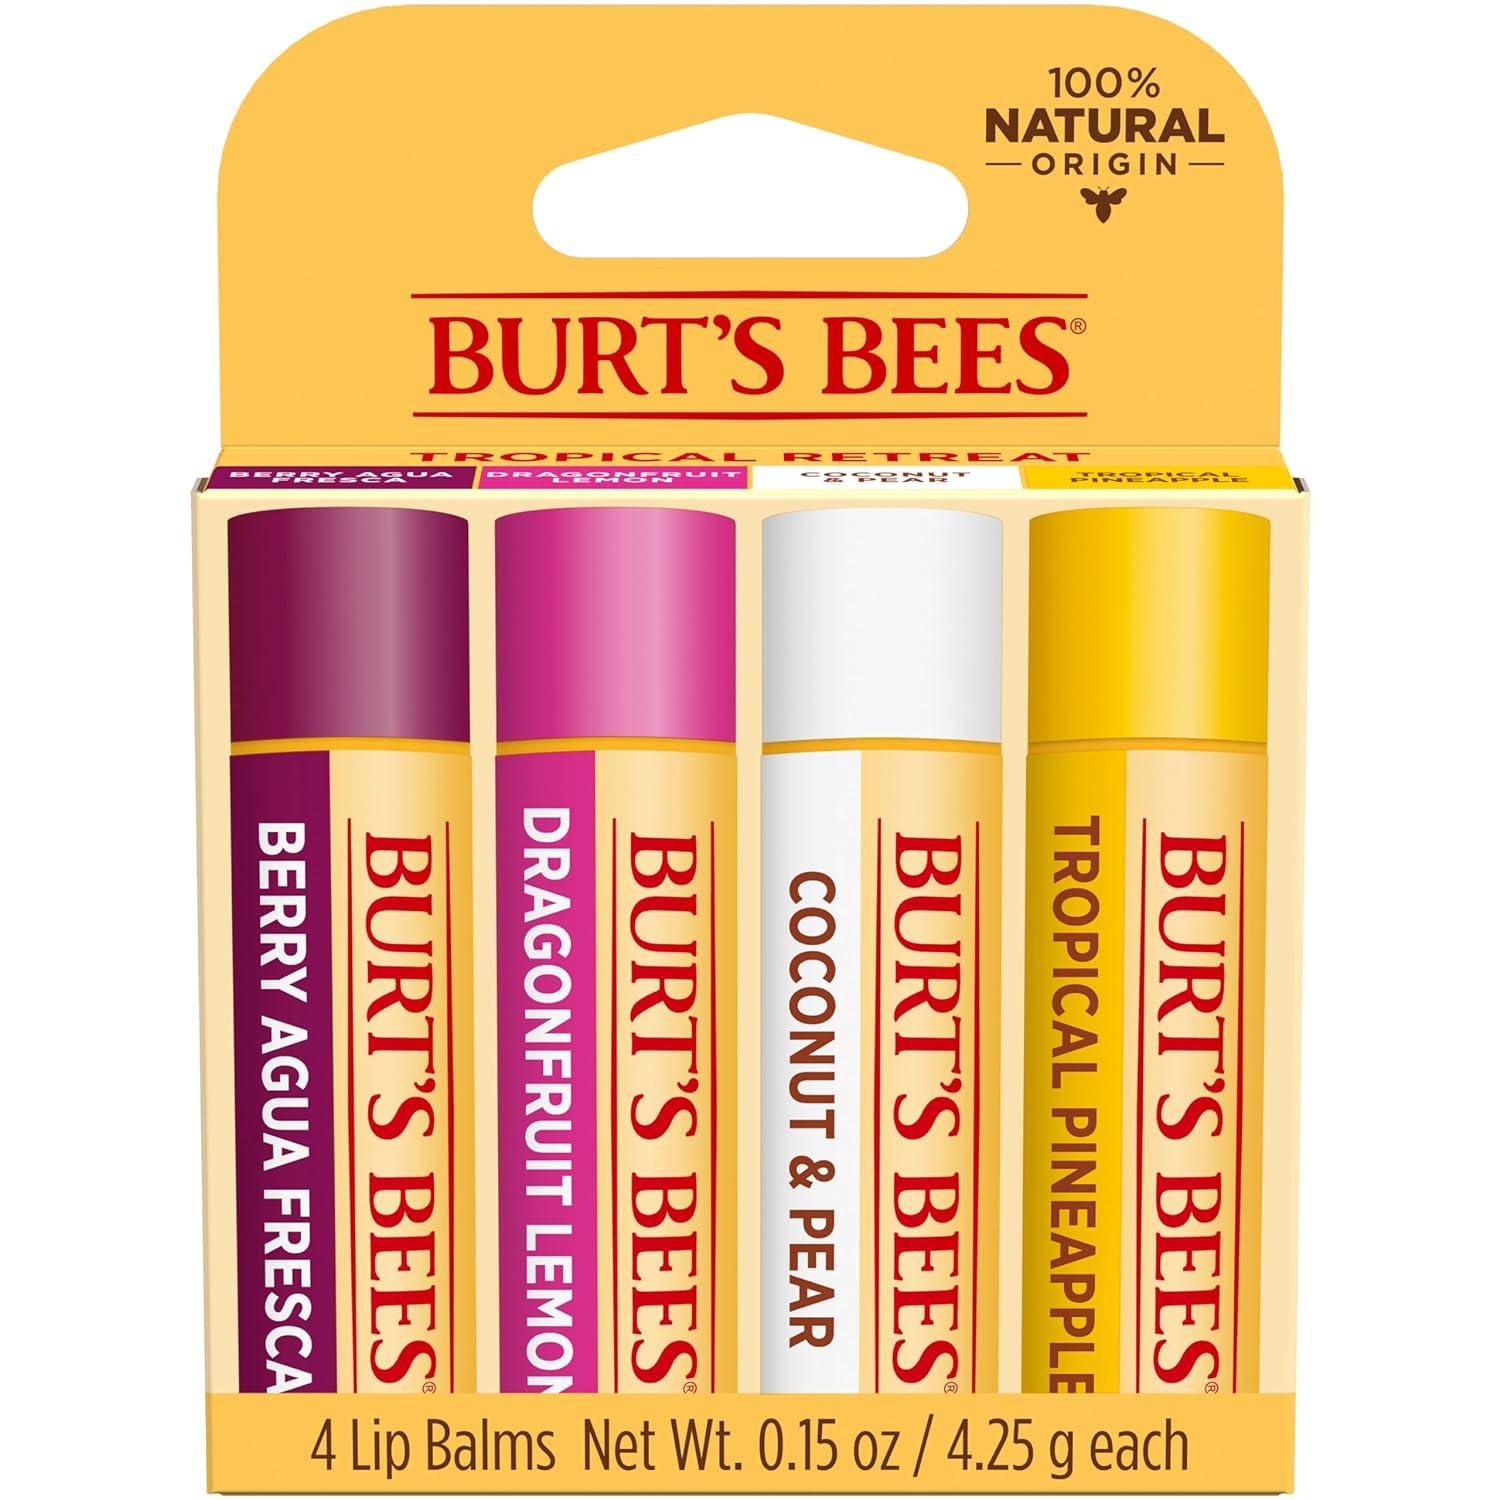 Burts Bees Lip Balm 4 Pack for $6